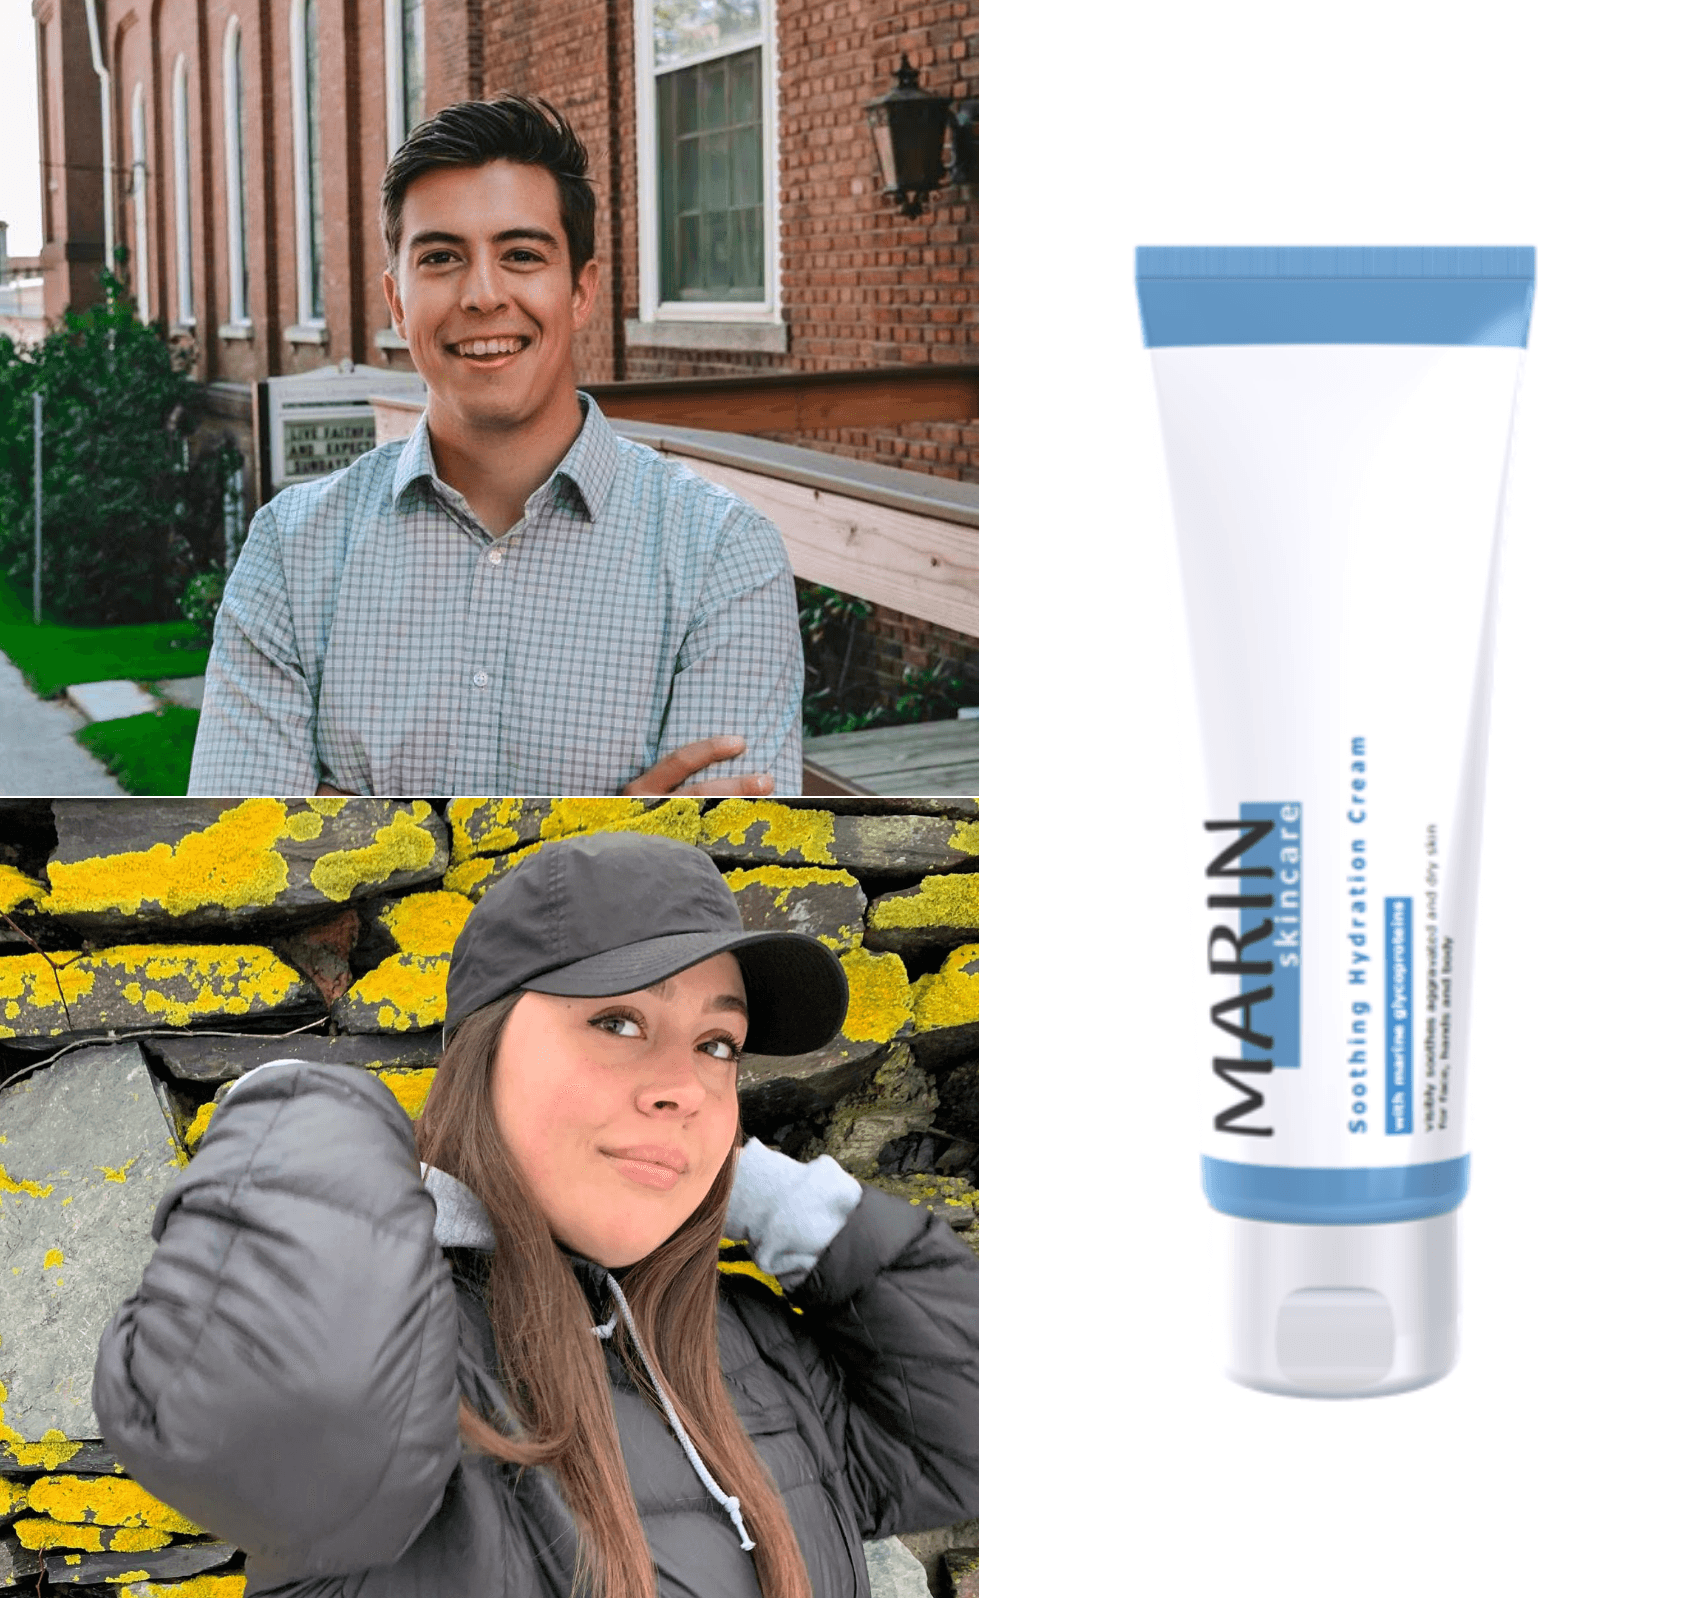 Patrick Breeding and Amber Boutiette, co-founders of Dermarus and eczema skincare brand Marin Skincare